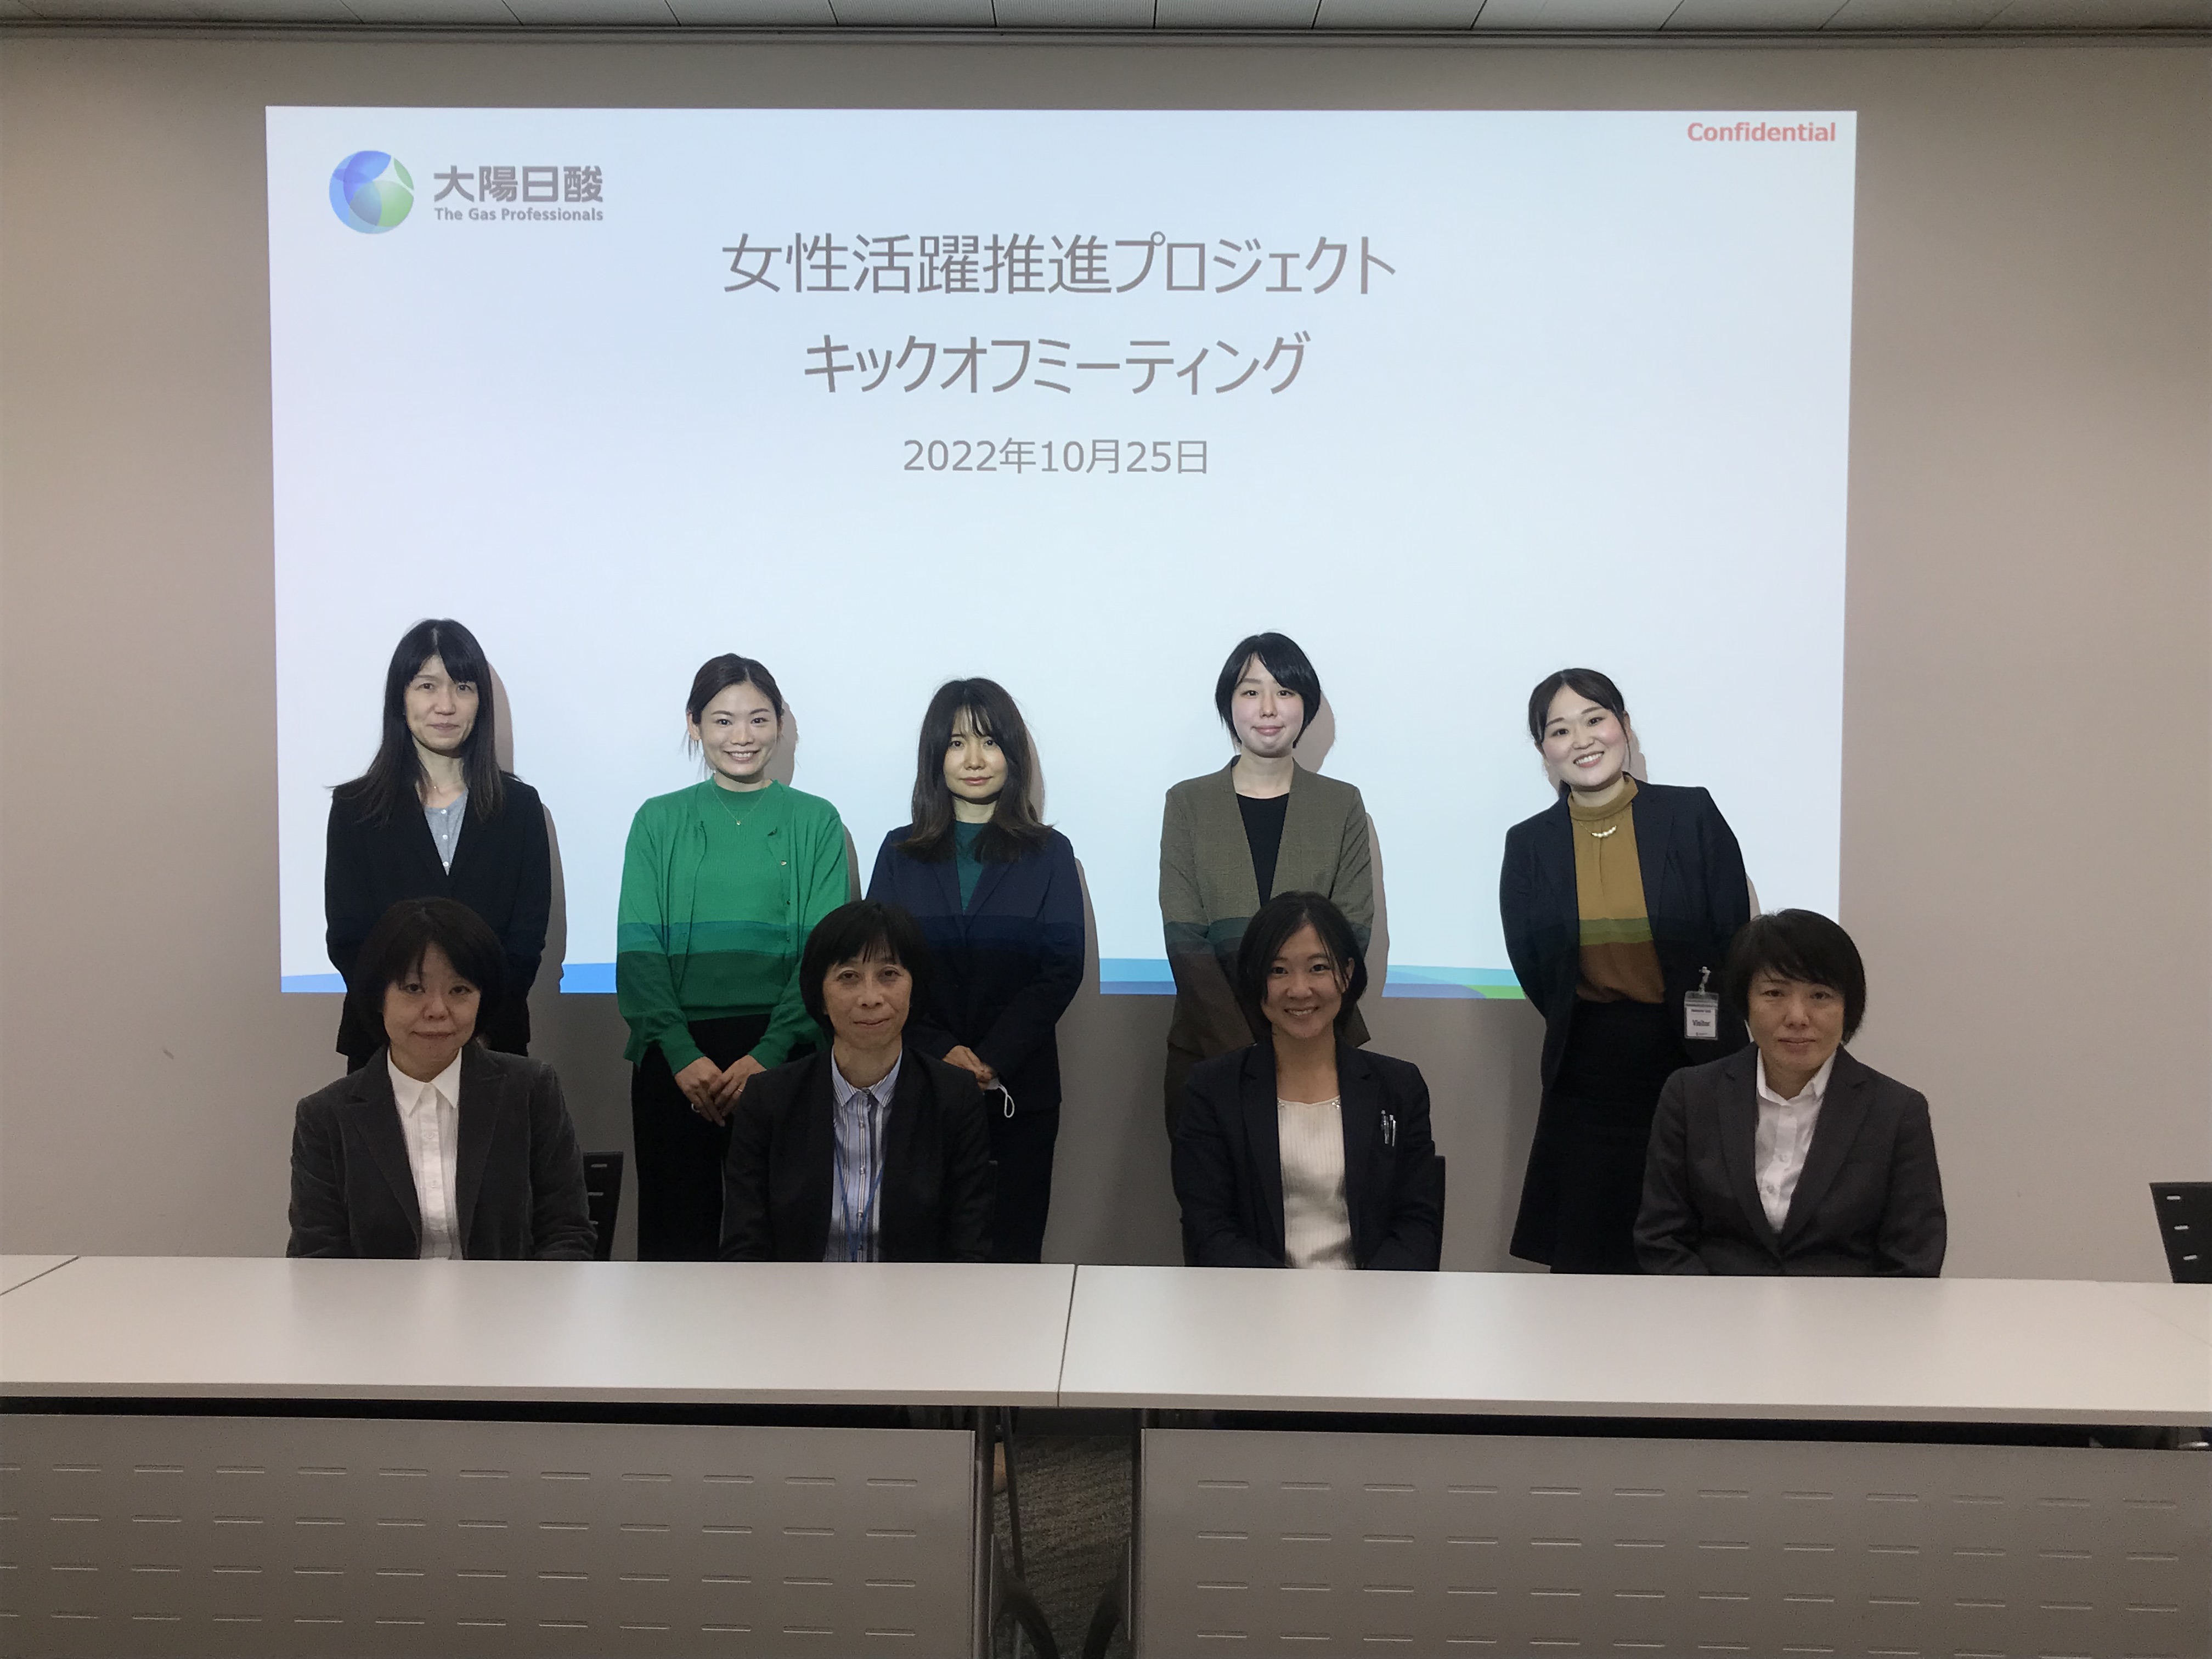 Launch of Promotion Project Team for Women’s Active Engagement at Taiyo Nippon Sanso